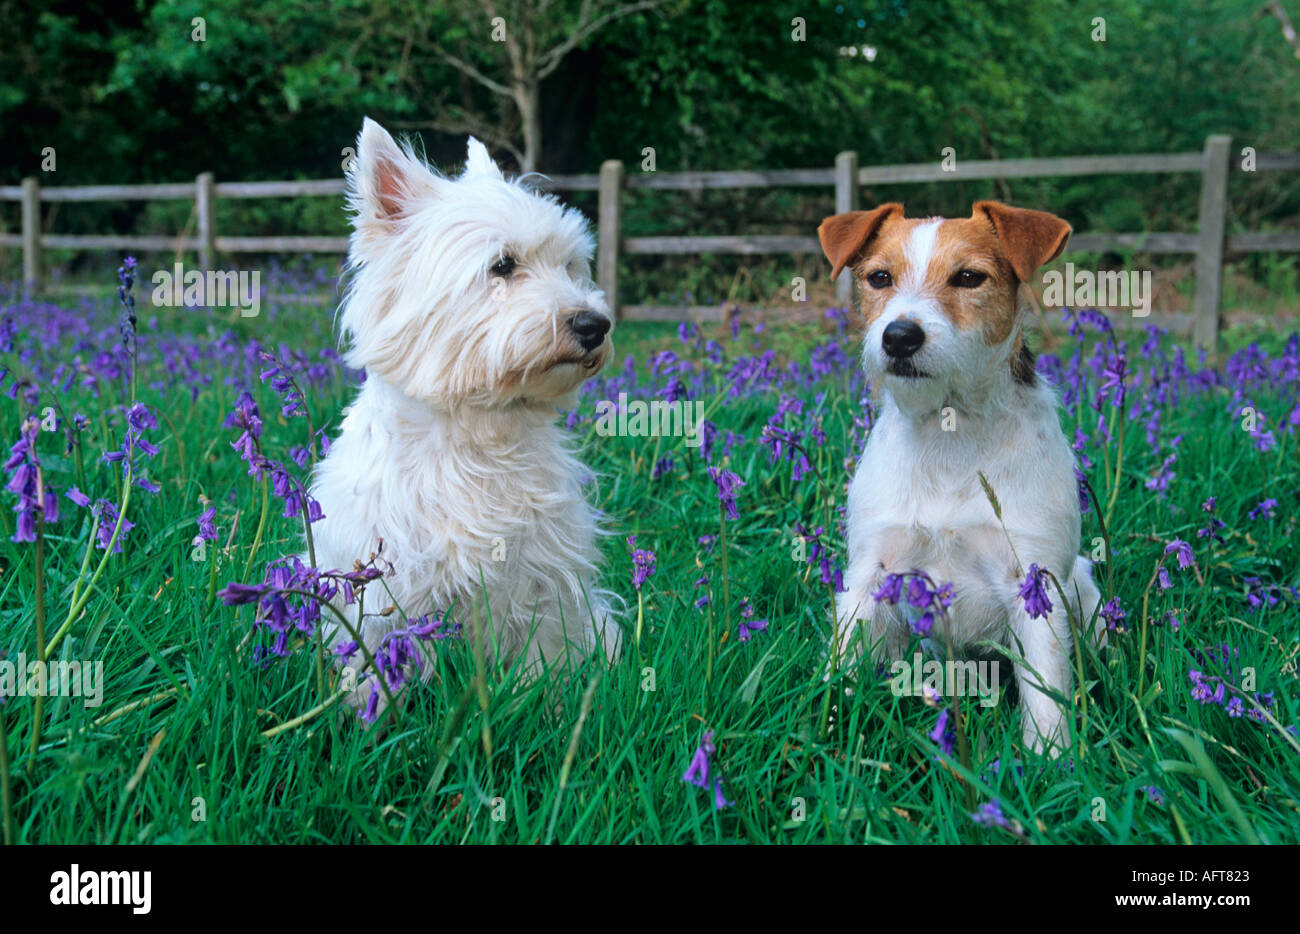 jack russell terrier west highland white terrier